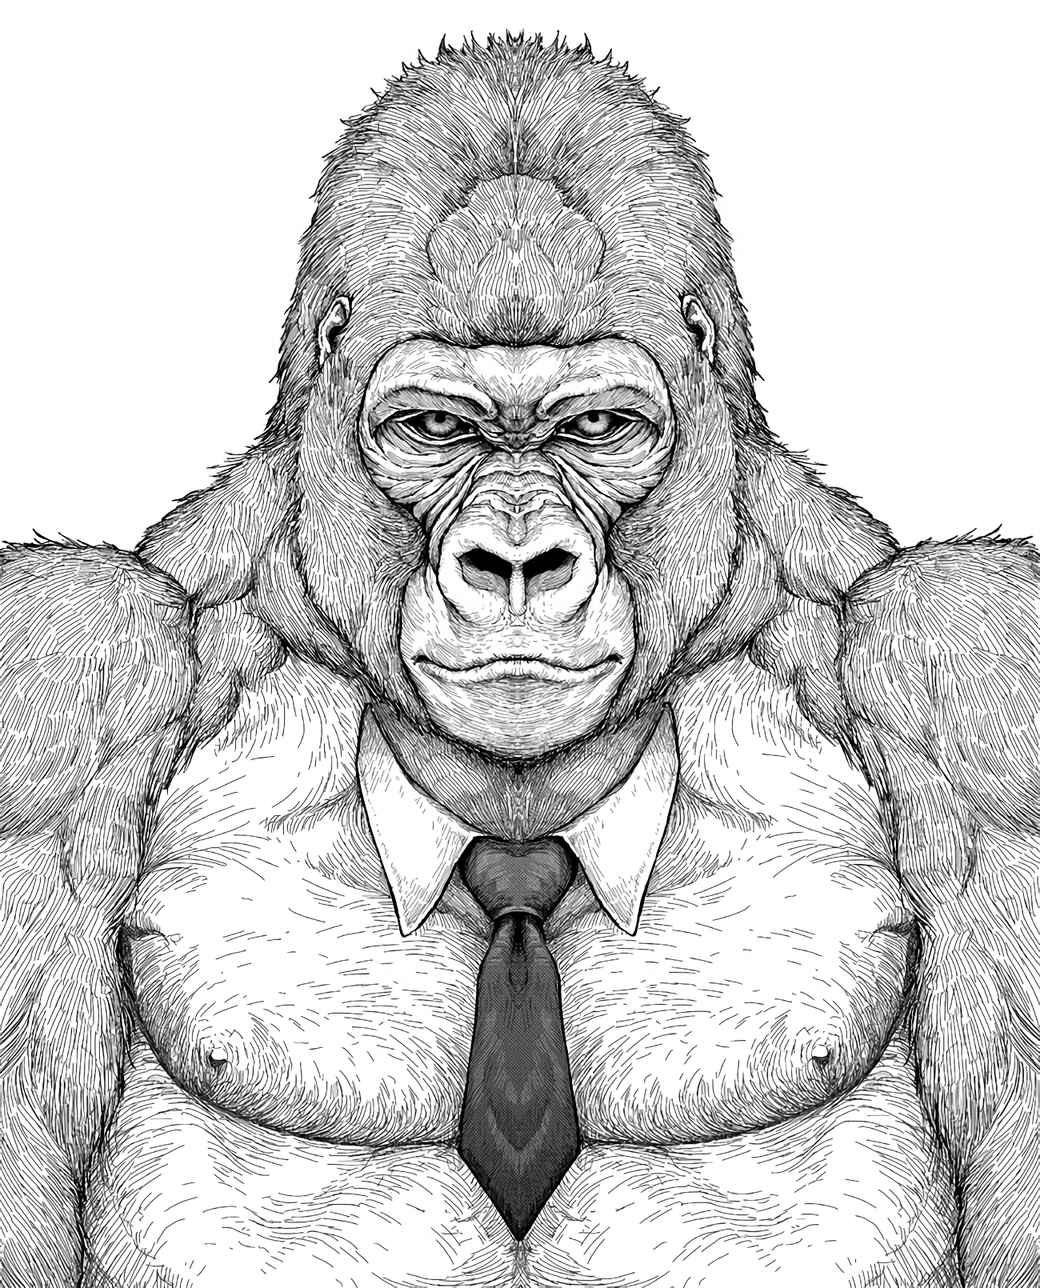 An Extremely Attractive Gorilla Ch. 6 The Transfer Student